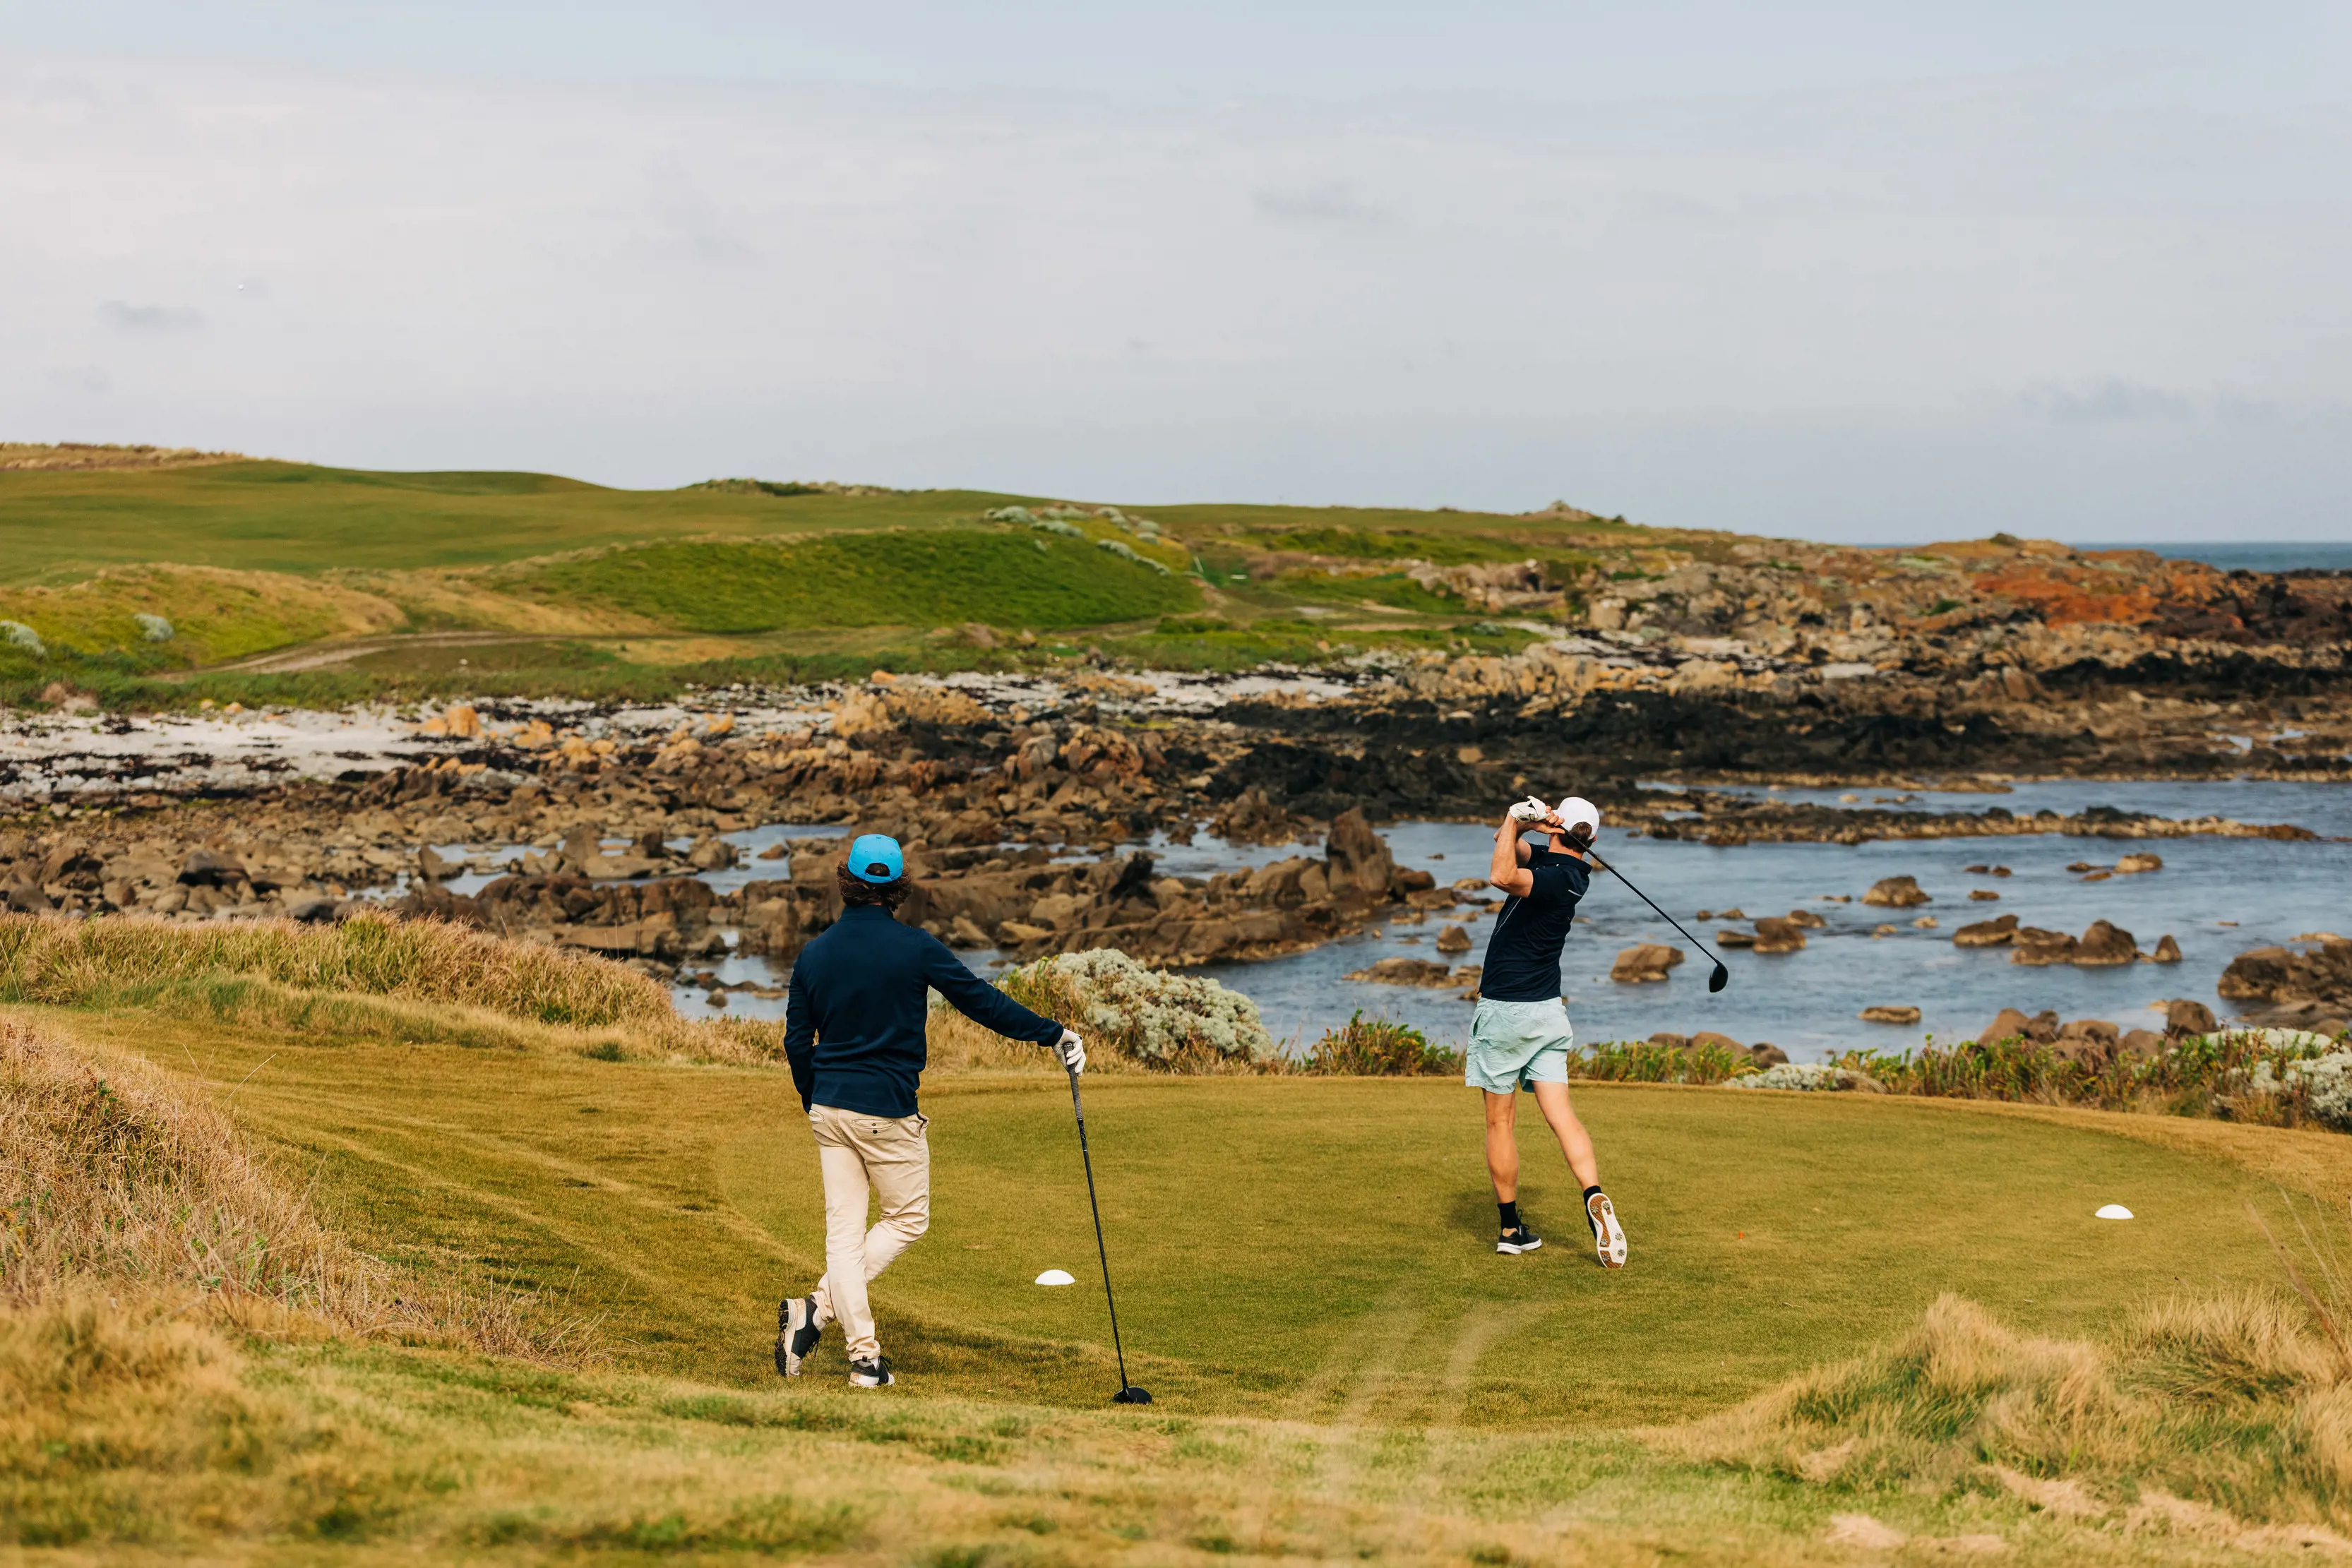 A golfer watches his friend take a swing at Ocean Dunes Golf Course, King Island. Landscape views in the background.